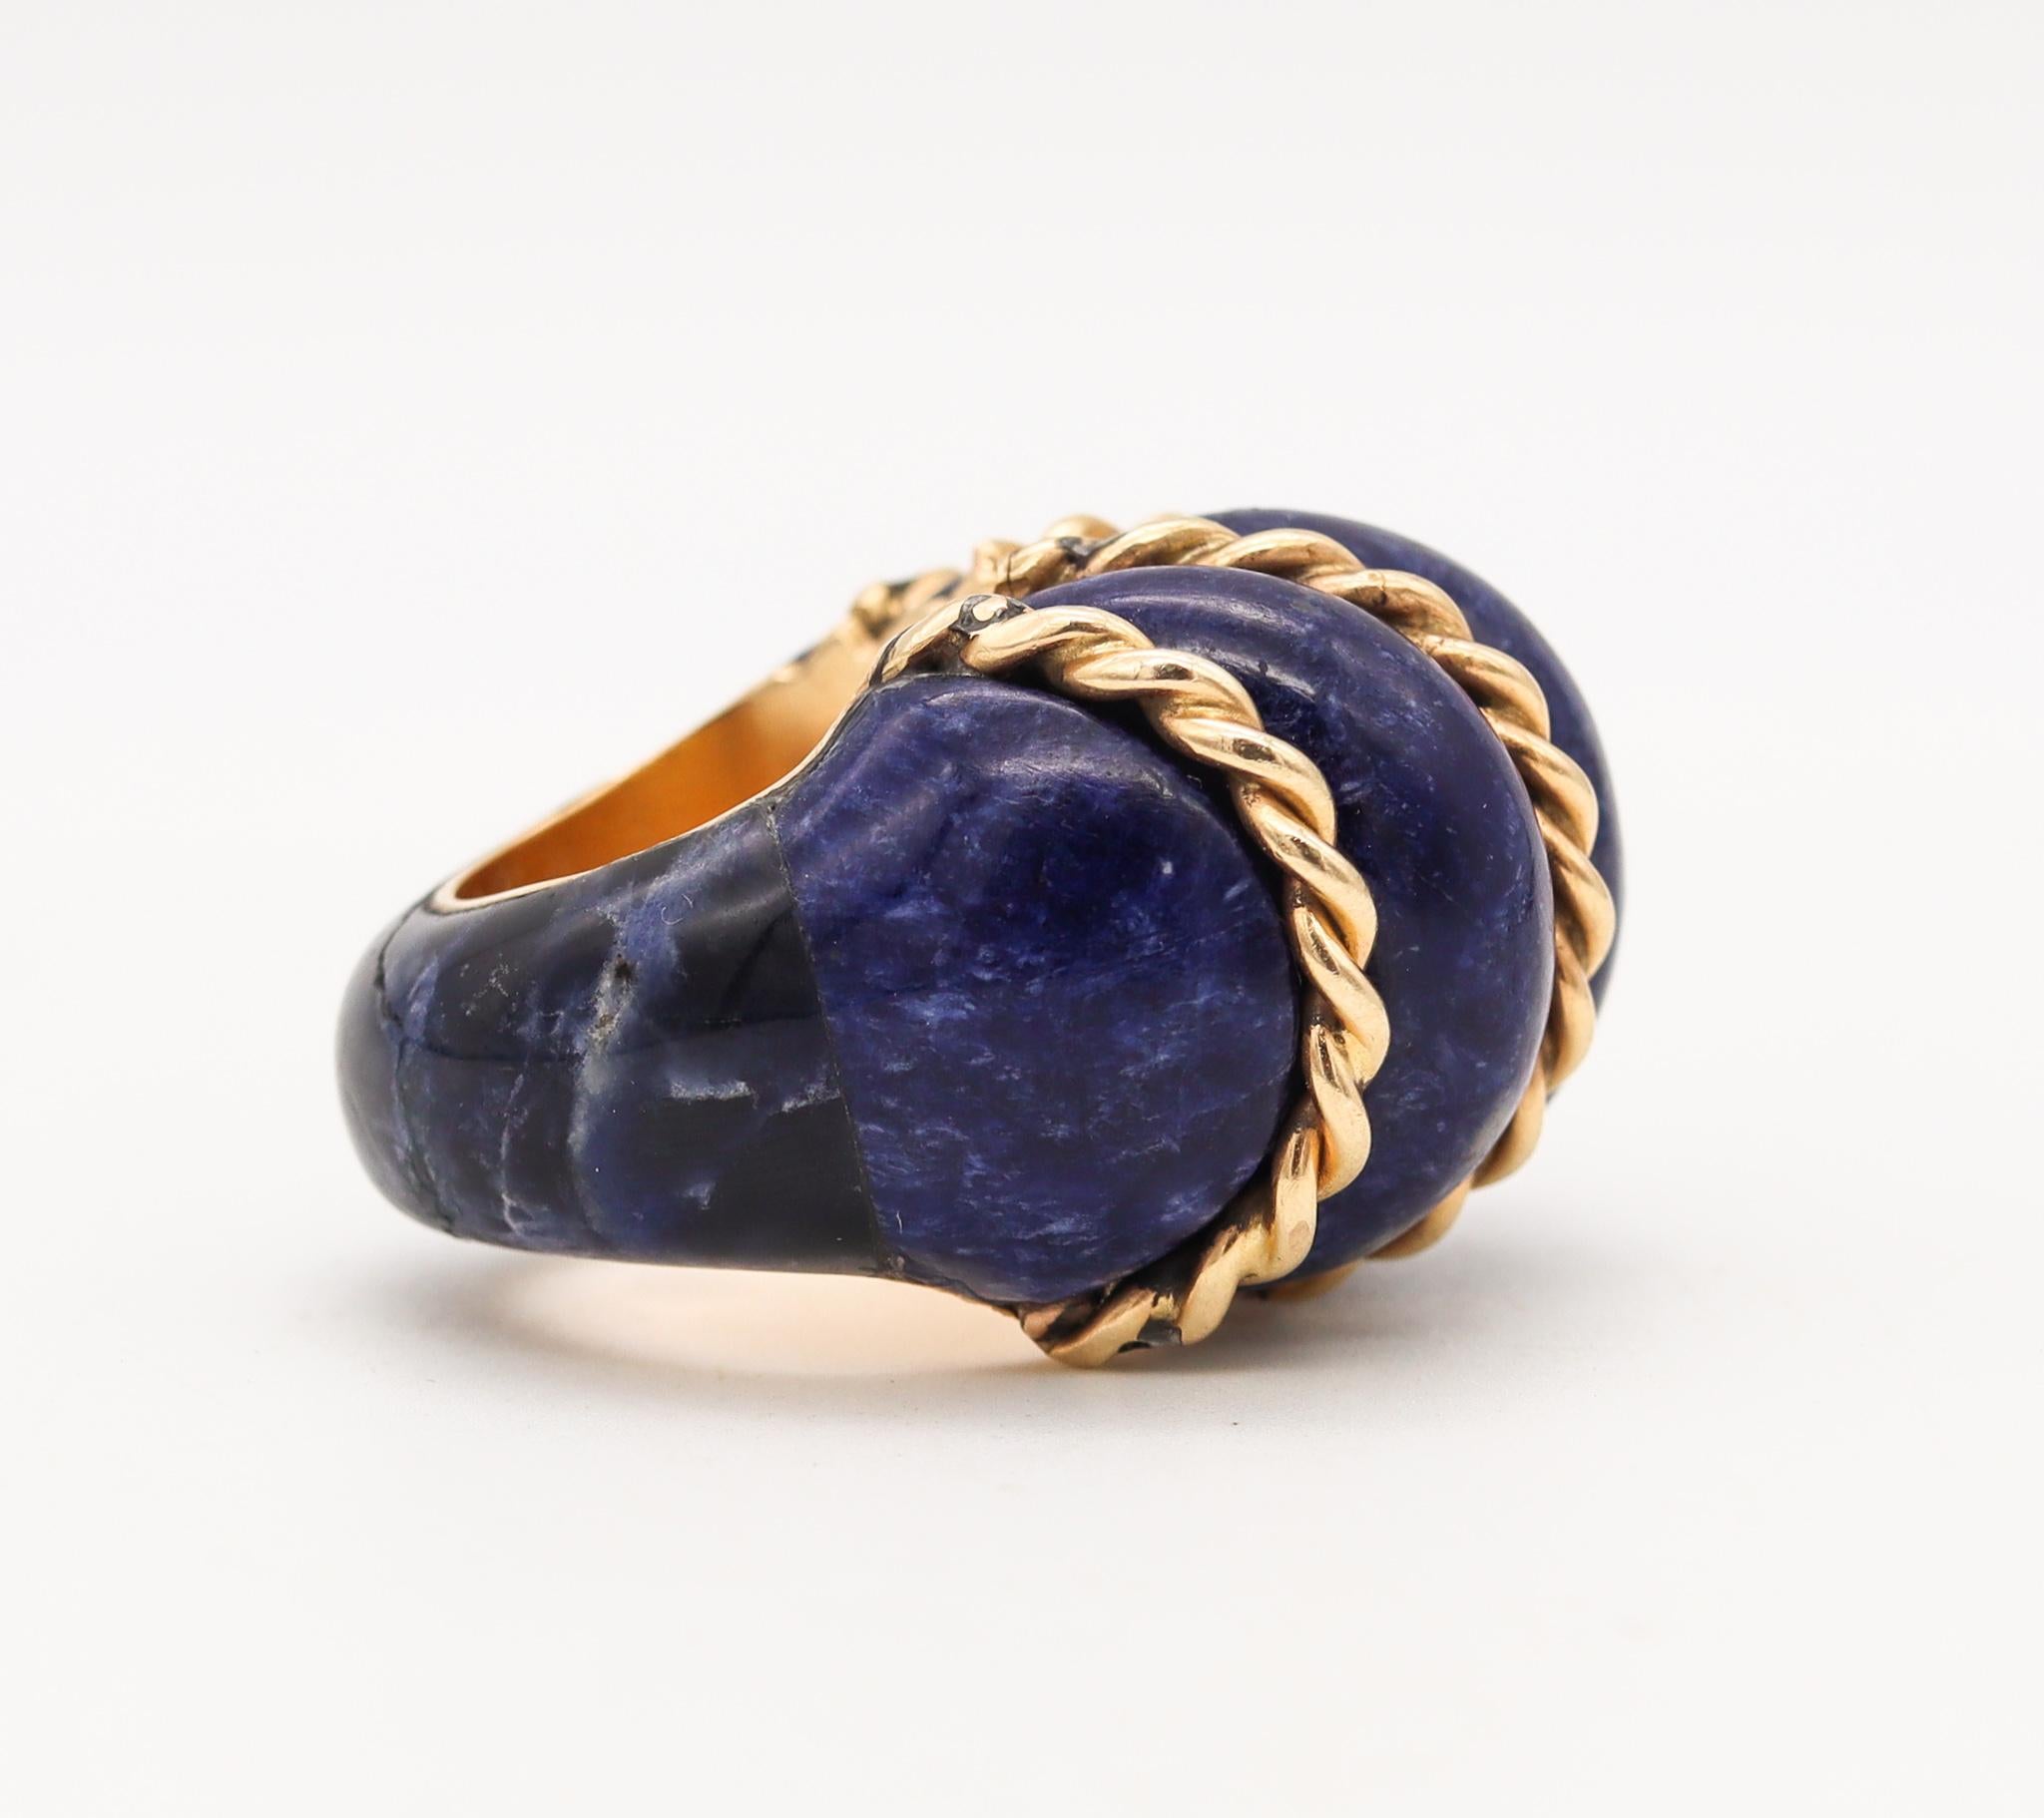 Mixed Cut Seaman Schepps 1960 Shrimp Cocktail Ring in 18 Kt Gold with Fluted Lapis Lazuli